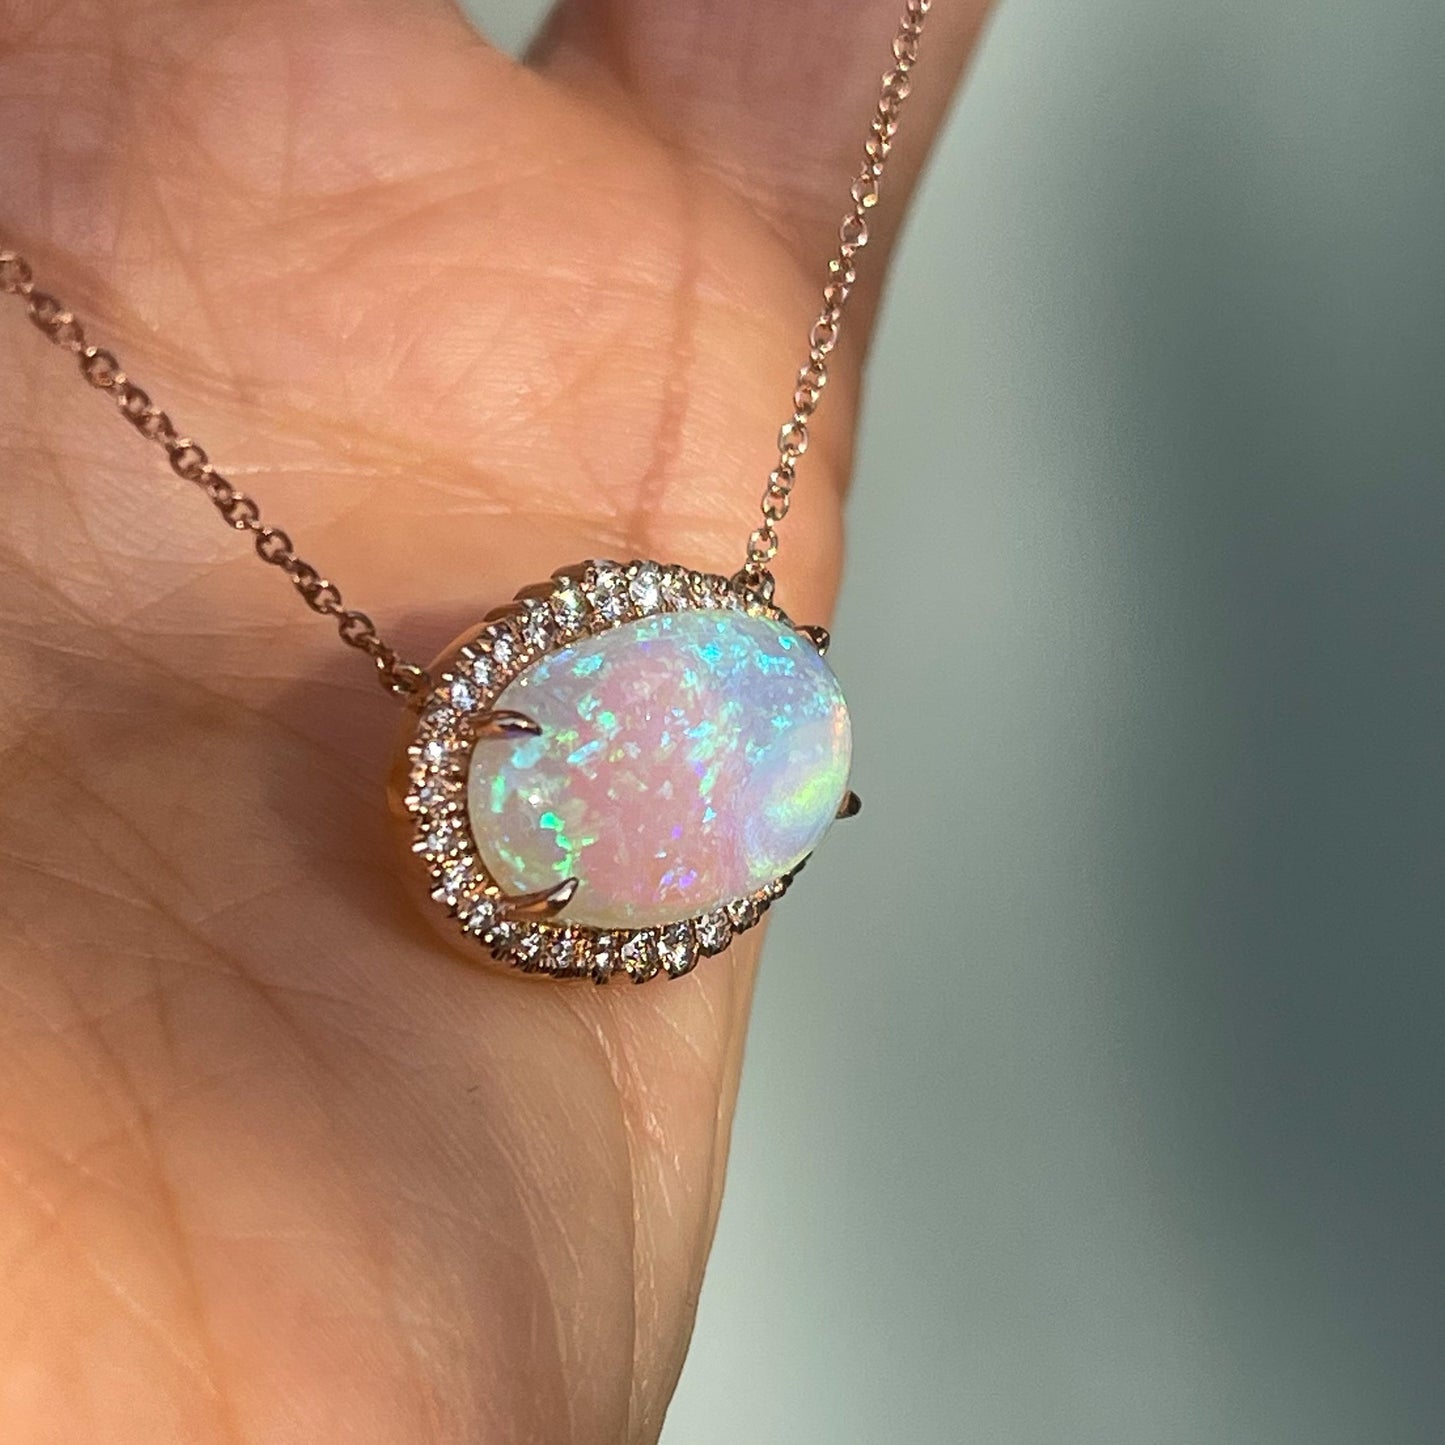  An Australian Opal Necklace by NIXIN Jewelry shot from the side, resting on a hand. The image displays the diamond halo and prong setting.